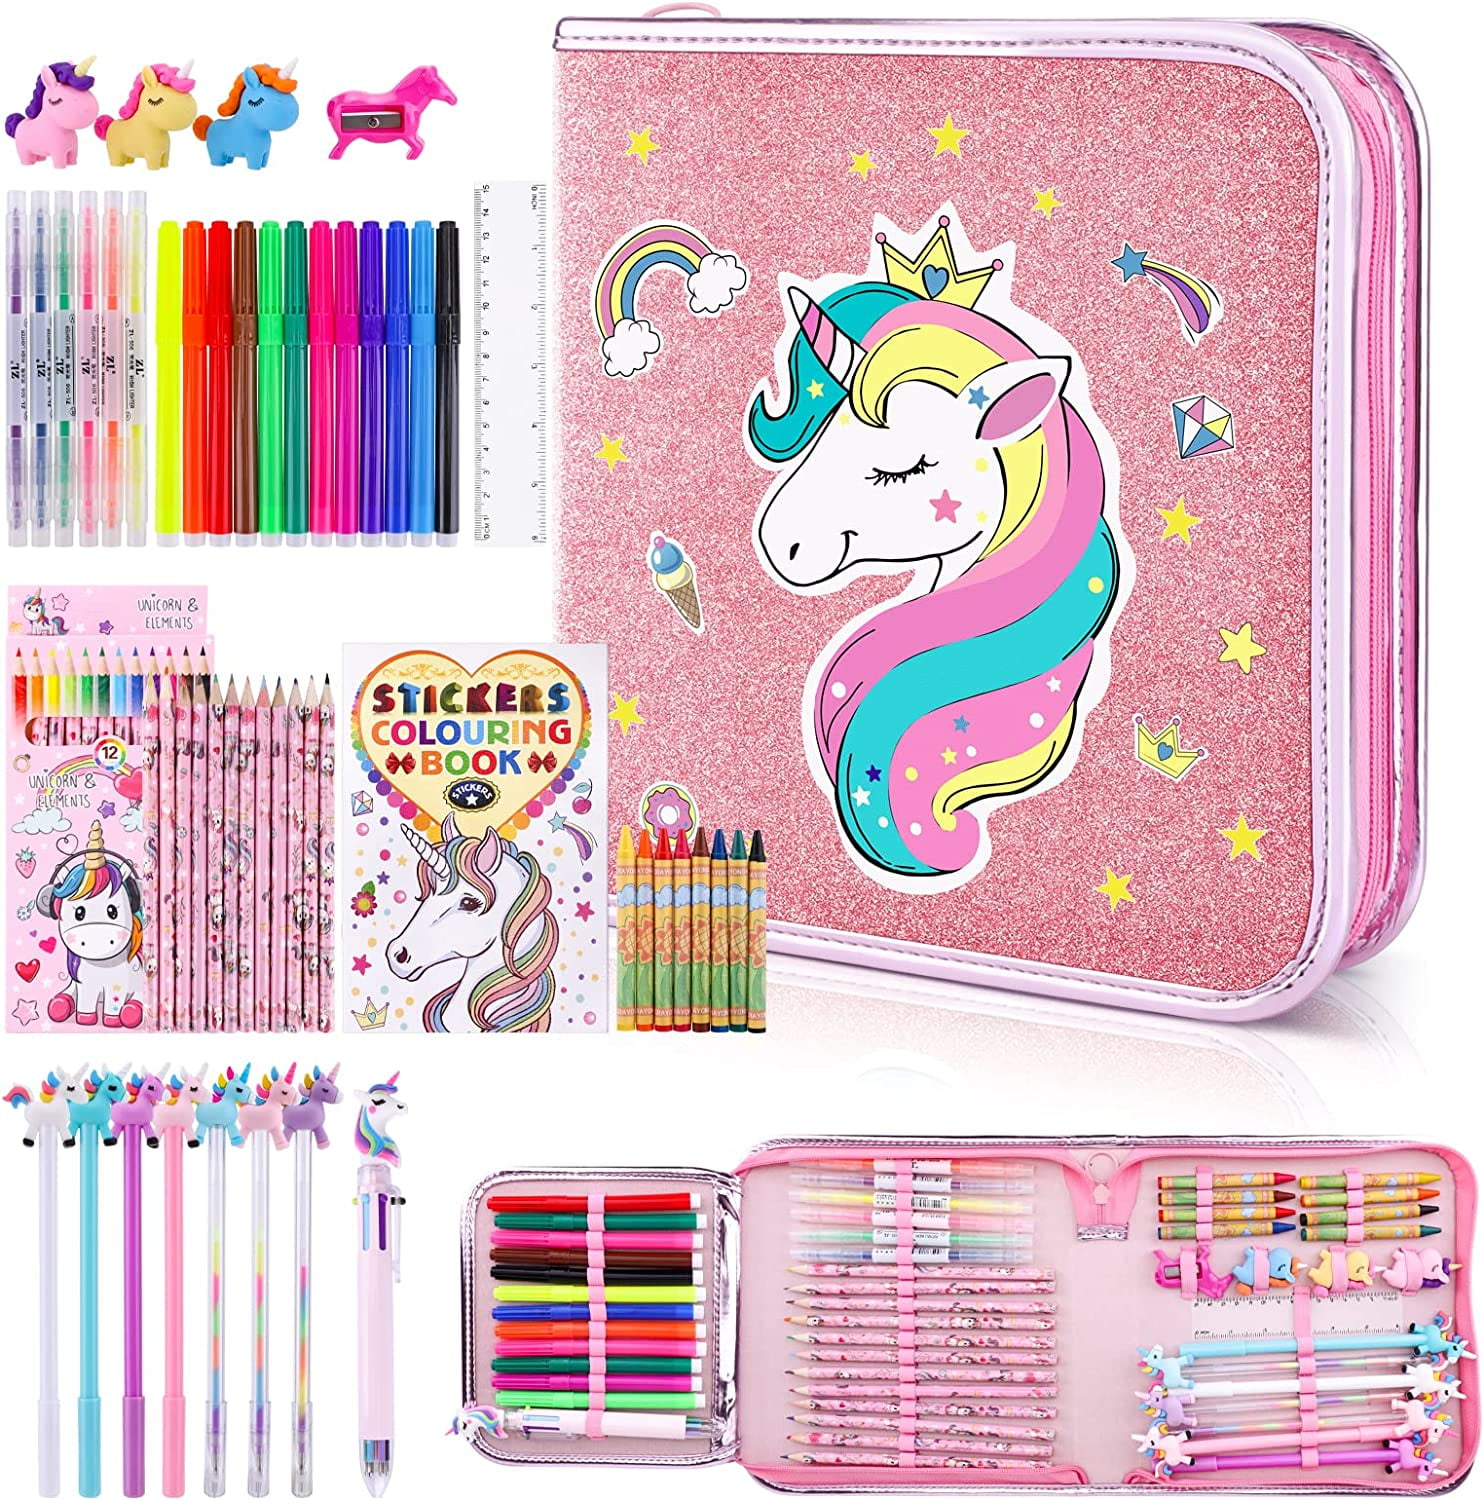 Fruit Scented Markers for Kids 57pcs Unicorn Pencil Case Unicorn Gifts for  Girls Age 4 5 6 7 8 9+, Valentines Day Gifts for Girls 4-6-8-12 Coloring